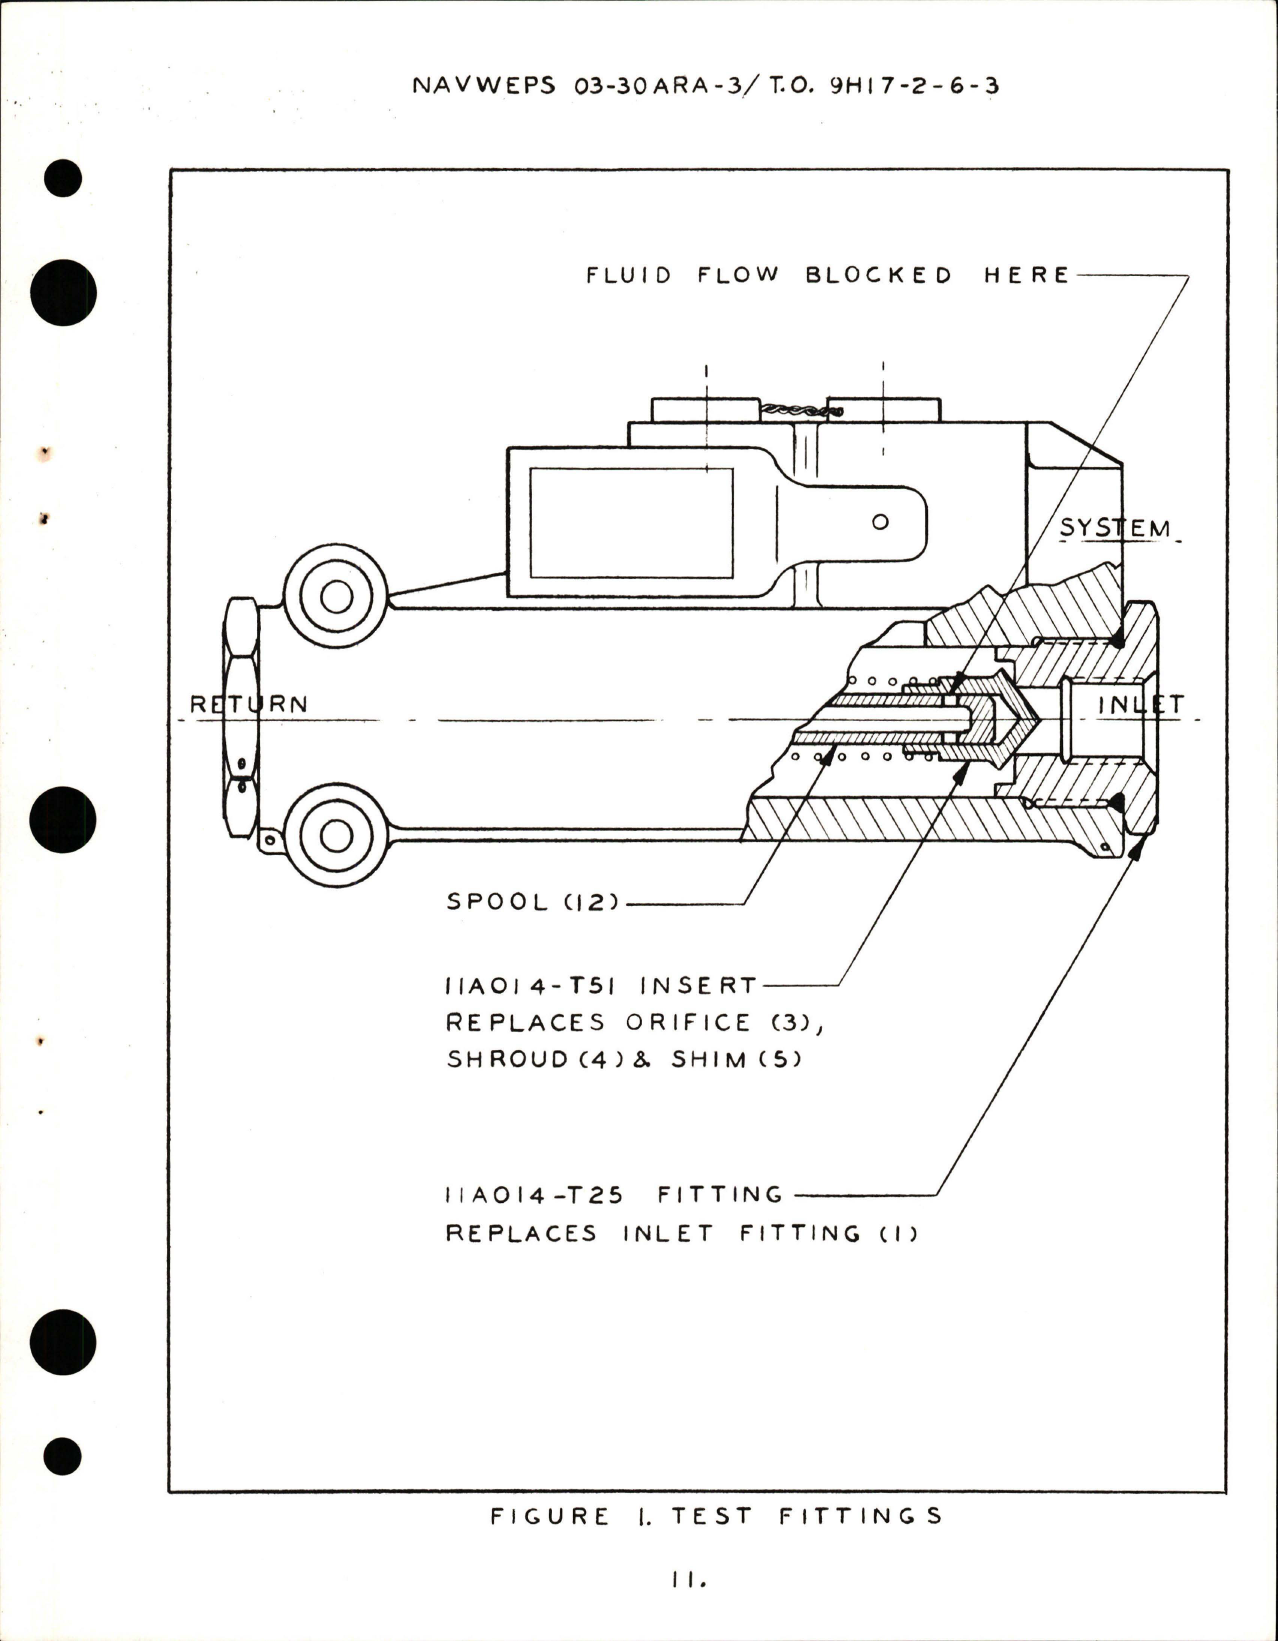 Sample page 9 from AirCorps Library document: Overhaul Instructions with Parts Breakdown for Pressure Regulator and Unloading Valve Assembly Flow - Part 11A014-1 